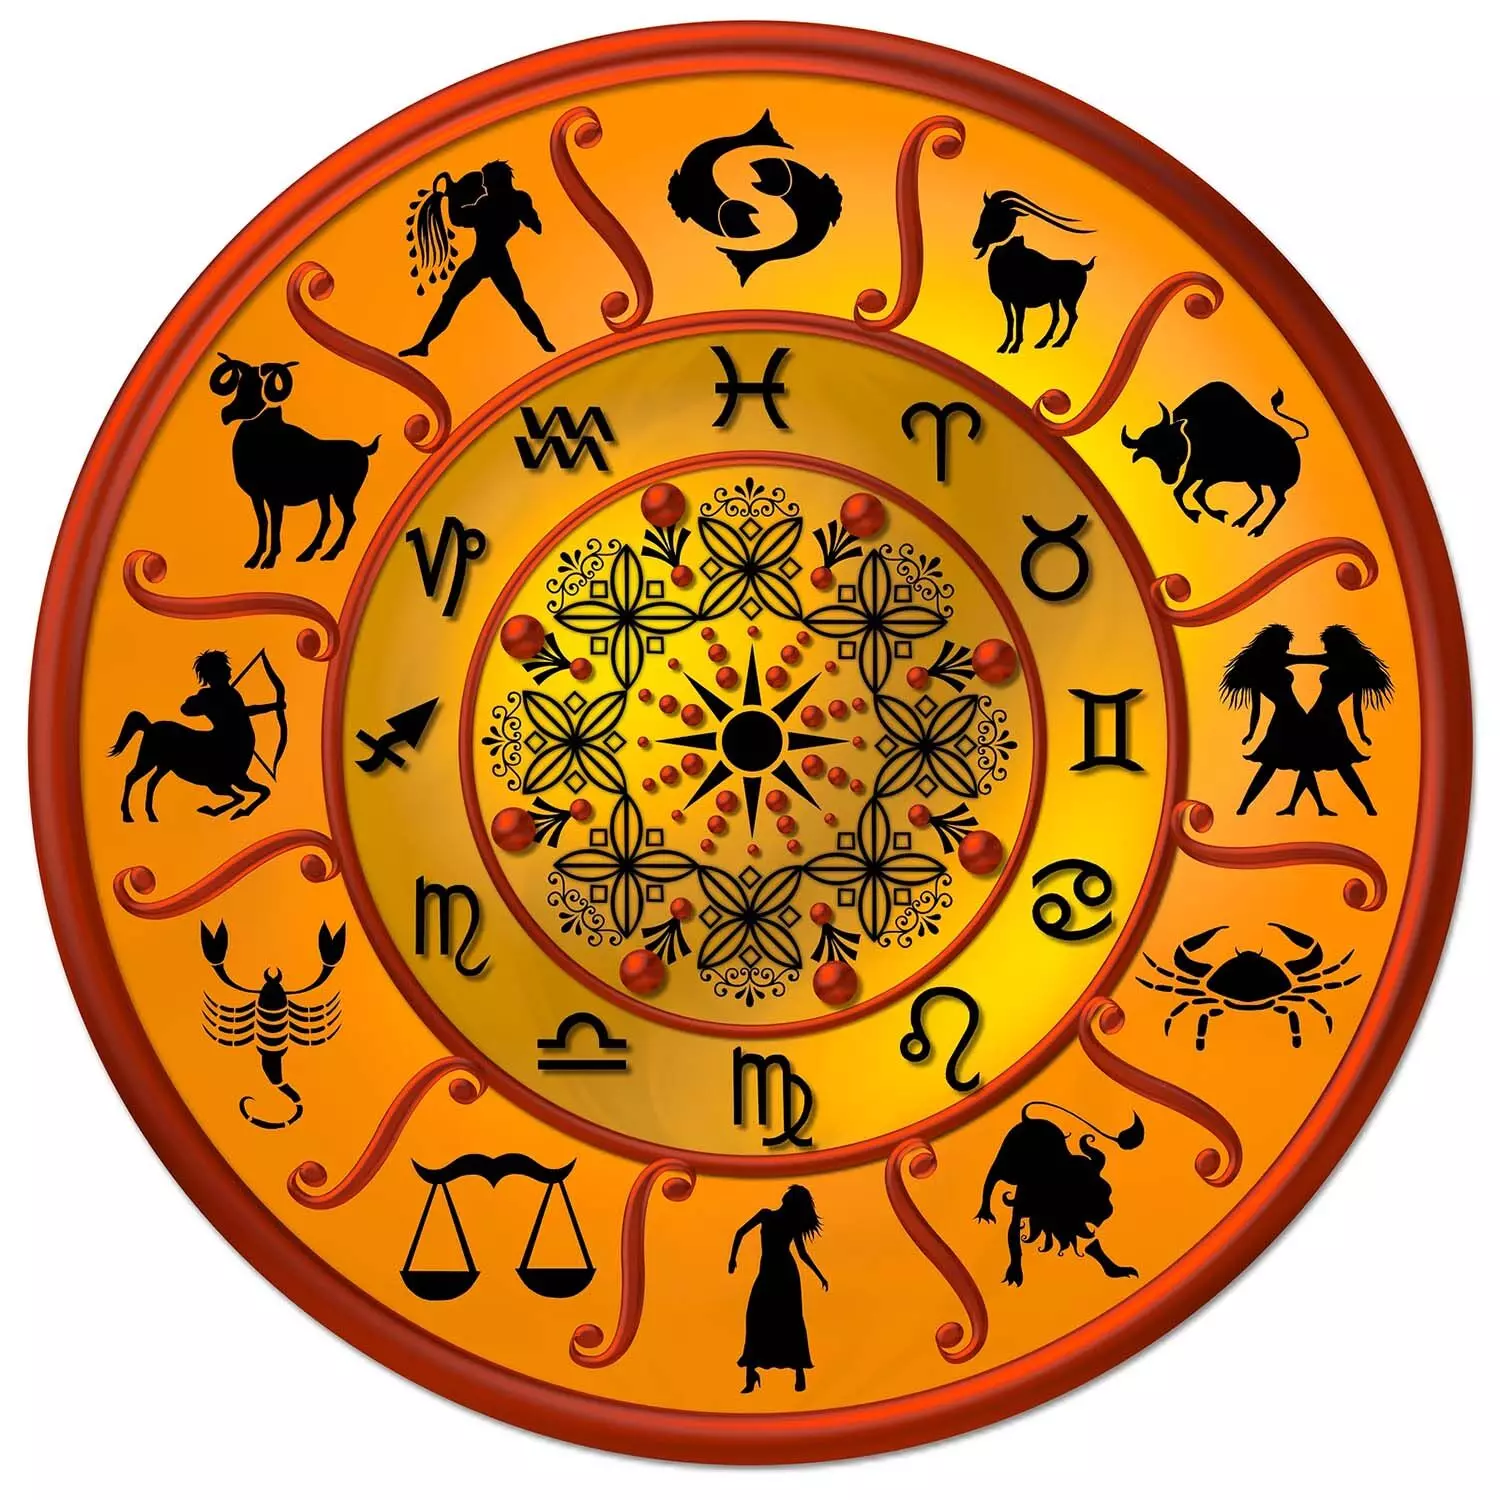 31 July – Know your todays horoscope